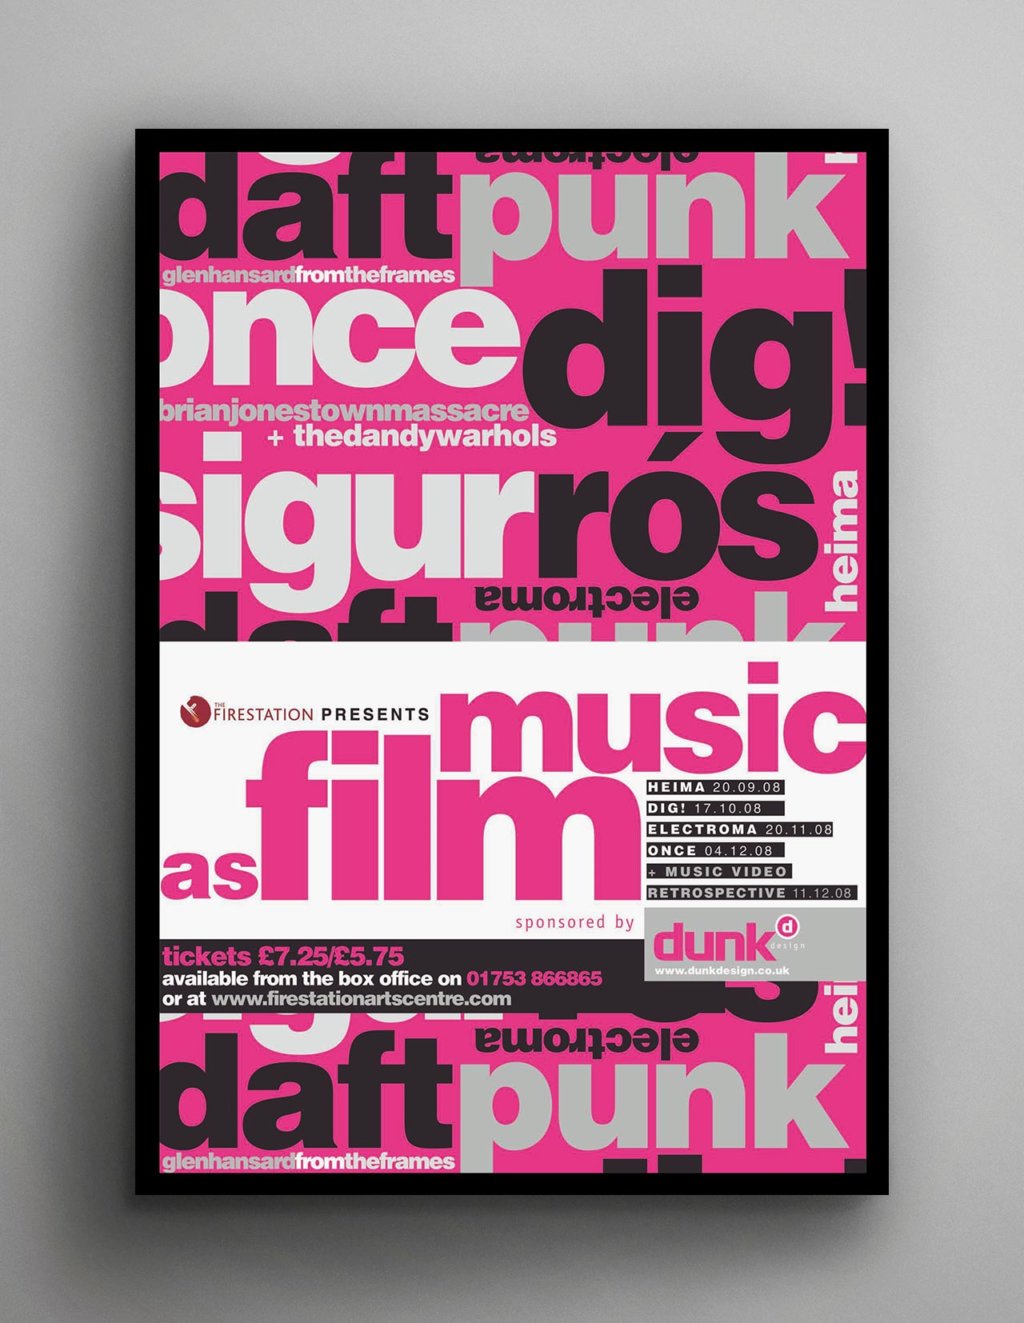 Music as film poster